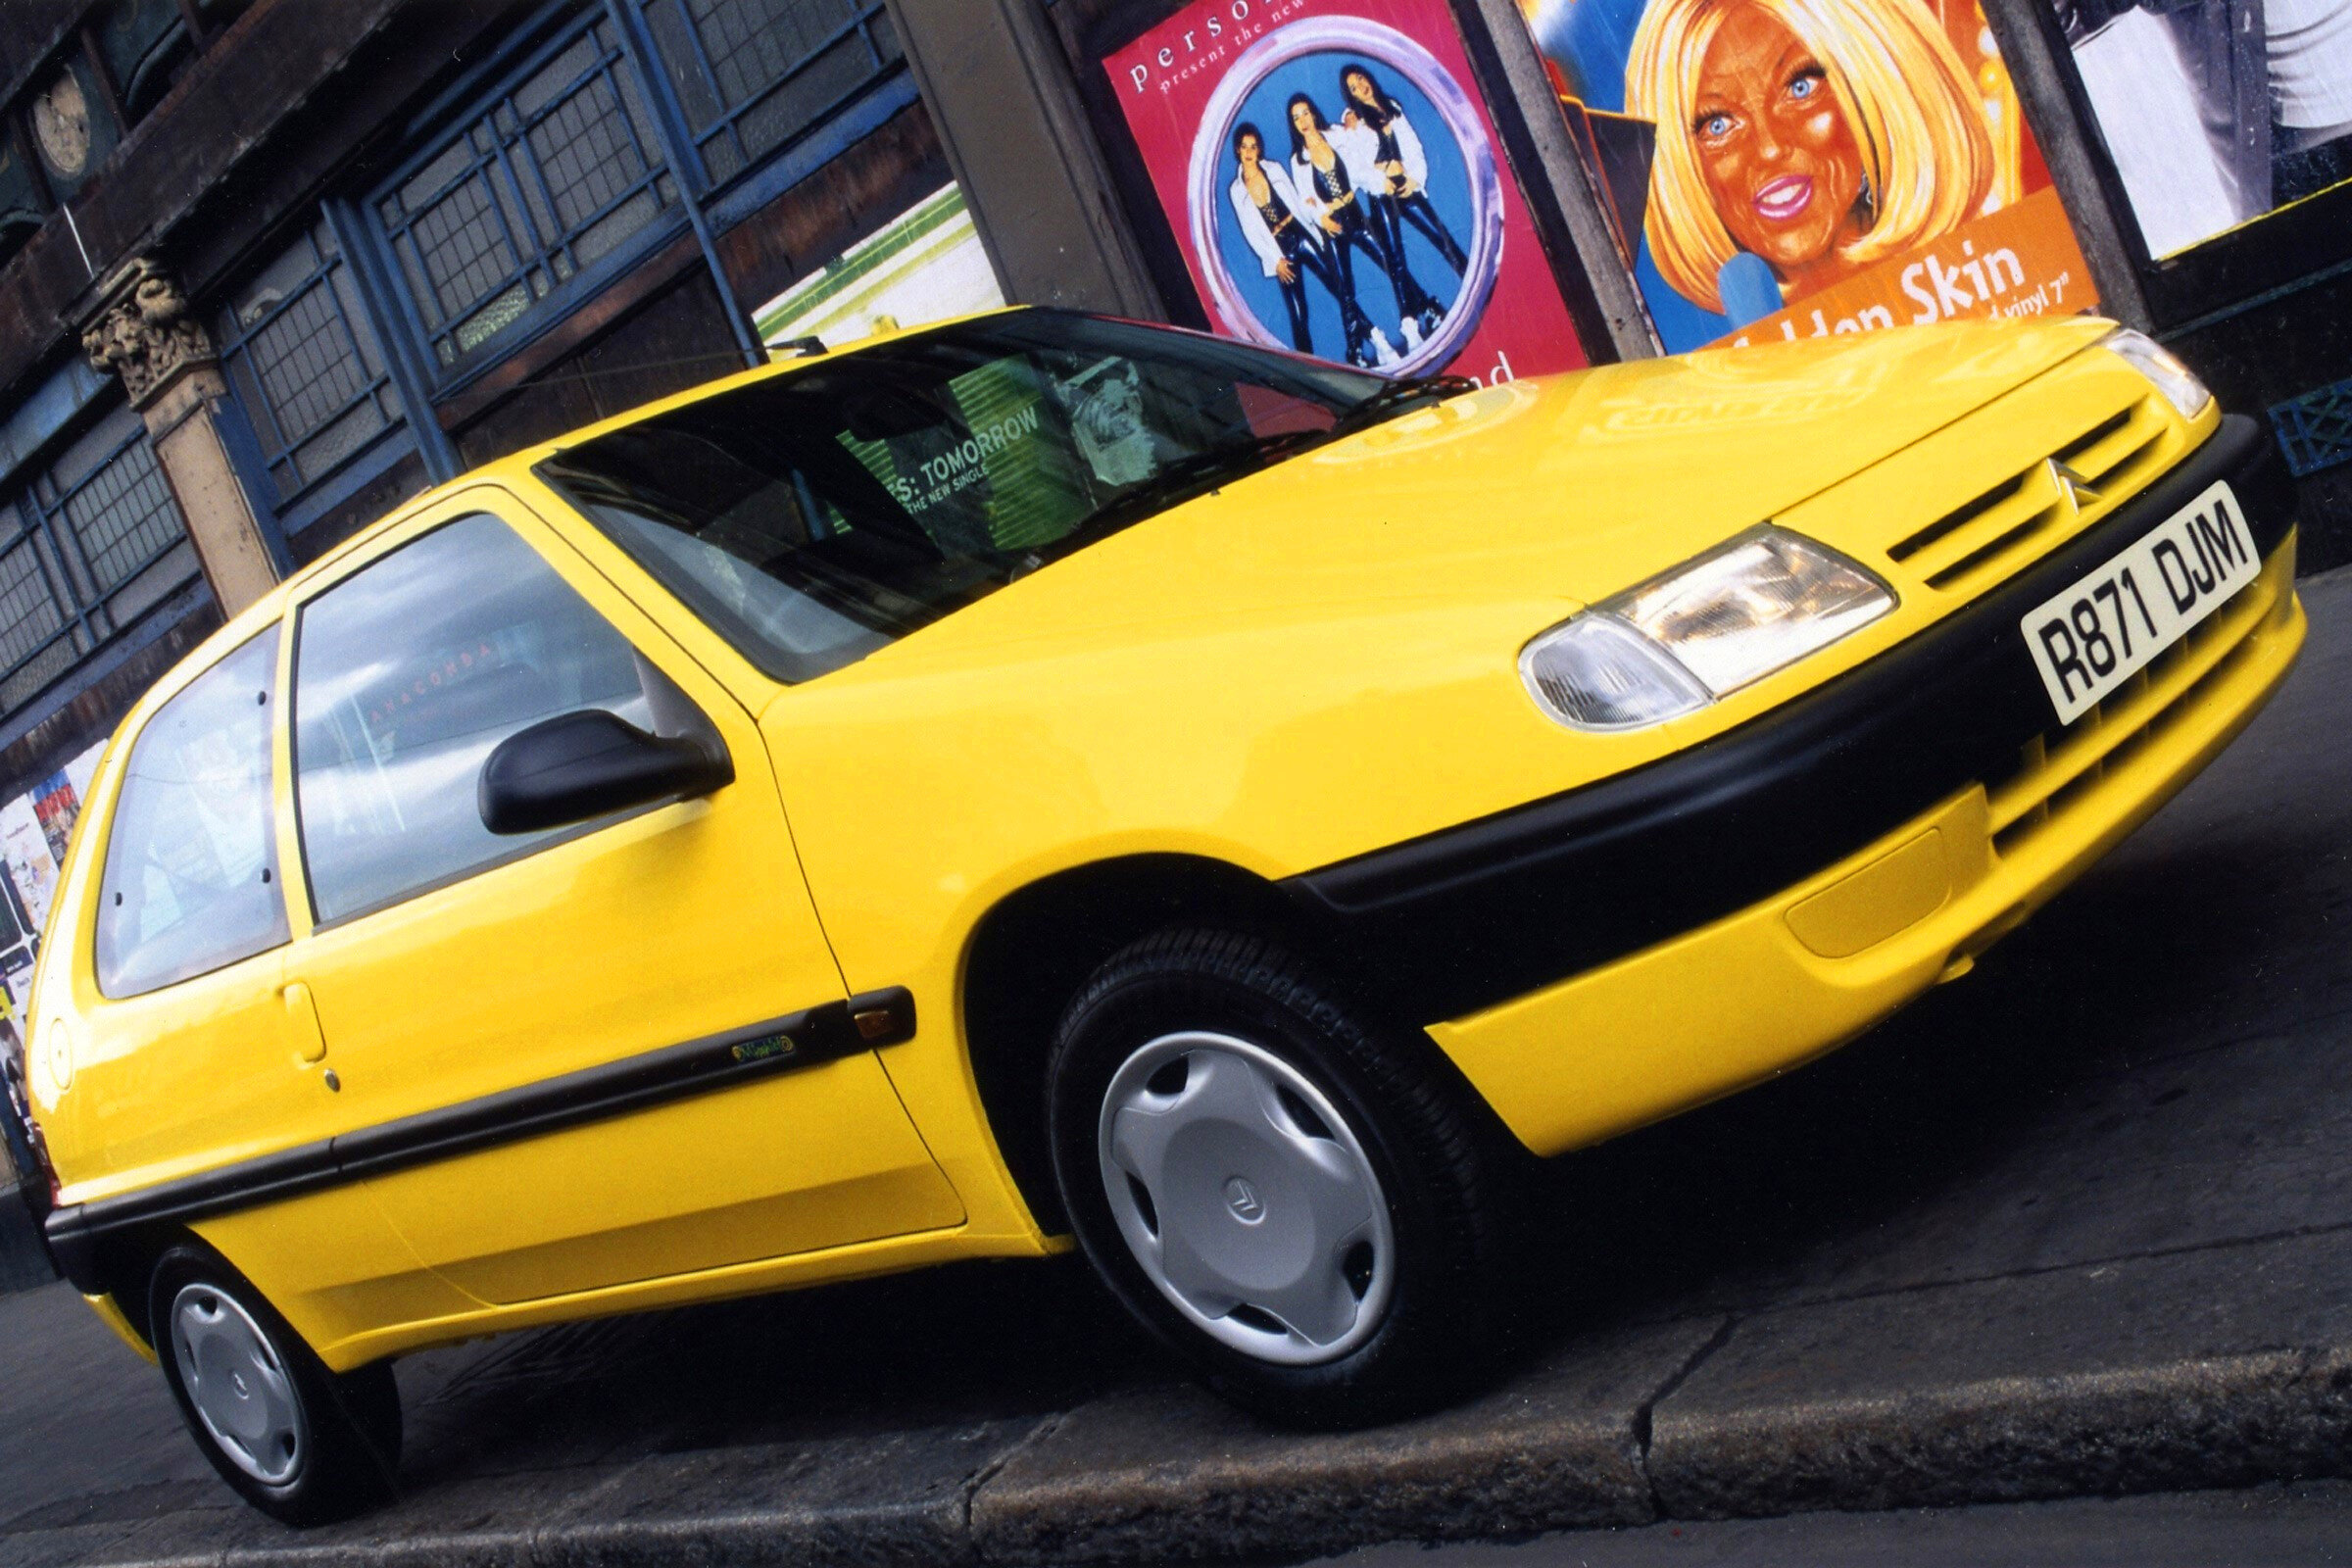 Citroen Saxo Mischief – what a great limited edition. Did you have one?